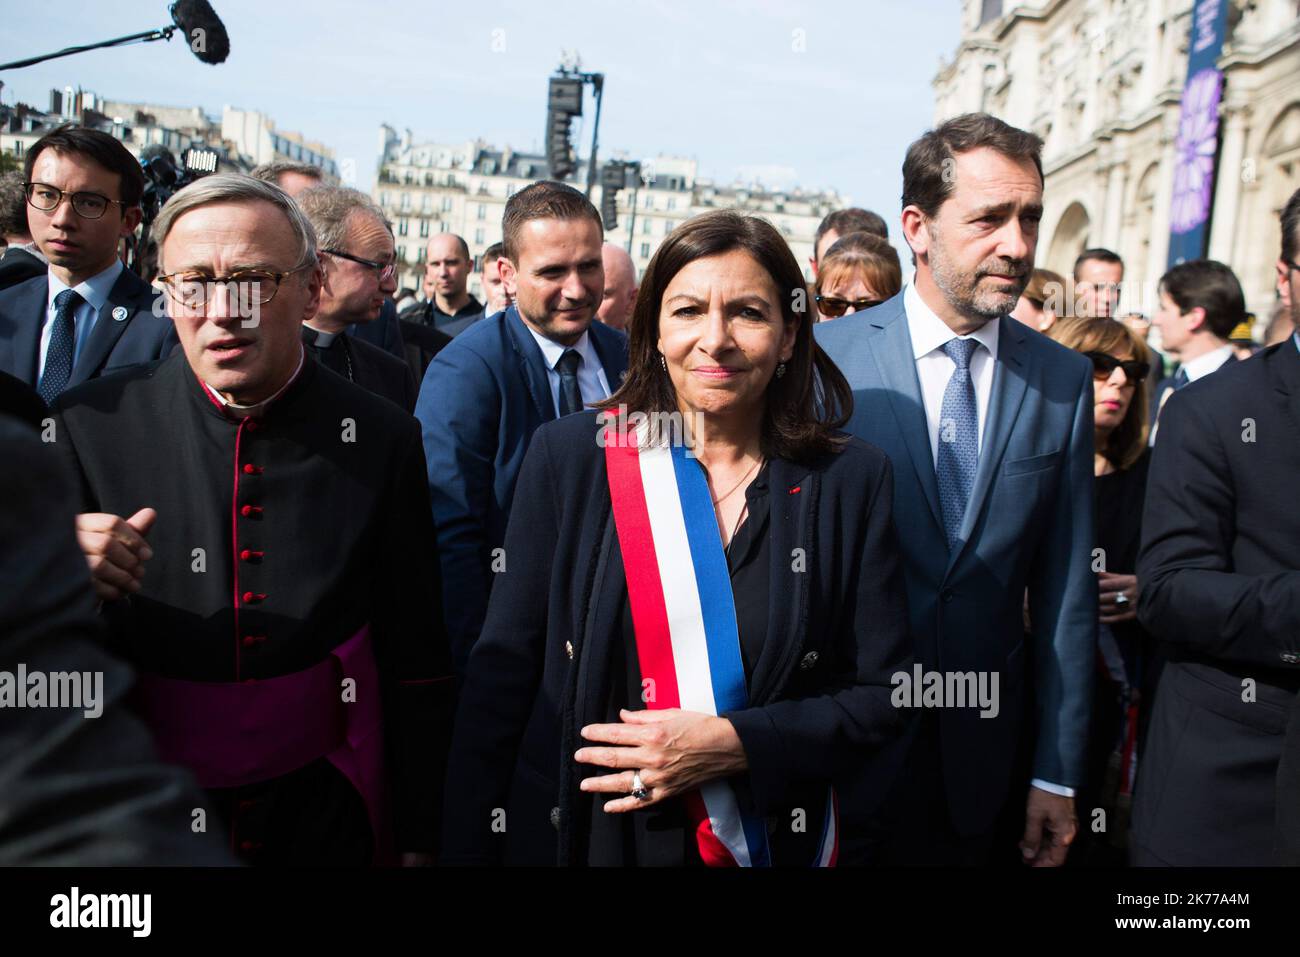 Jean-Marc Chauve, French Interior Minister Christophe Castaner, Paris prefect Didier Lallement, Paris mayor Anne Hidalgo, and other officials walk by Notre Dame cathedral on April 18, 2019 in Paris. France paid a daylong tribute on April 18, 2019 to the Paris firefighters who saved Notre Dame Cathedral from collapse, while construction workers rushed to secure an area above one of the church's famed rose-shaped windows and other vulnerable sections of the fire-damaged landmark.   Stock Photo